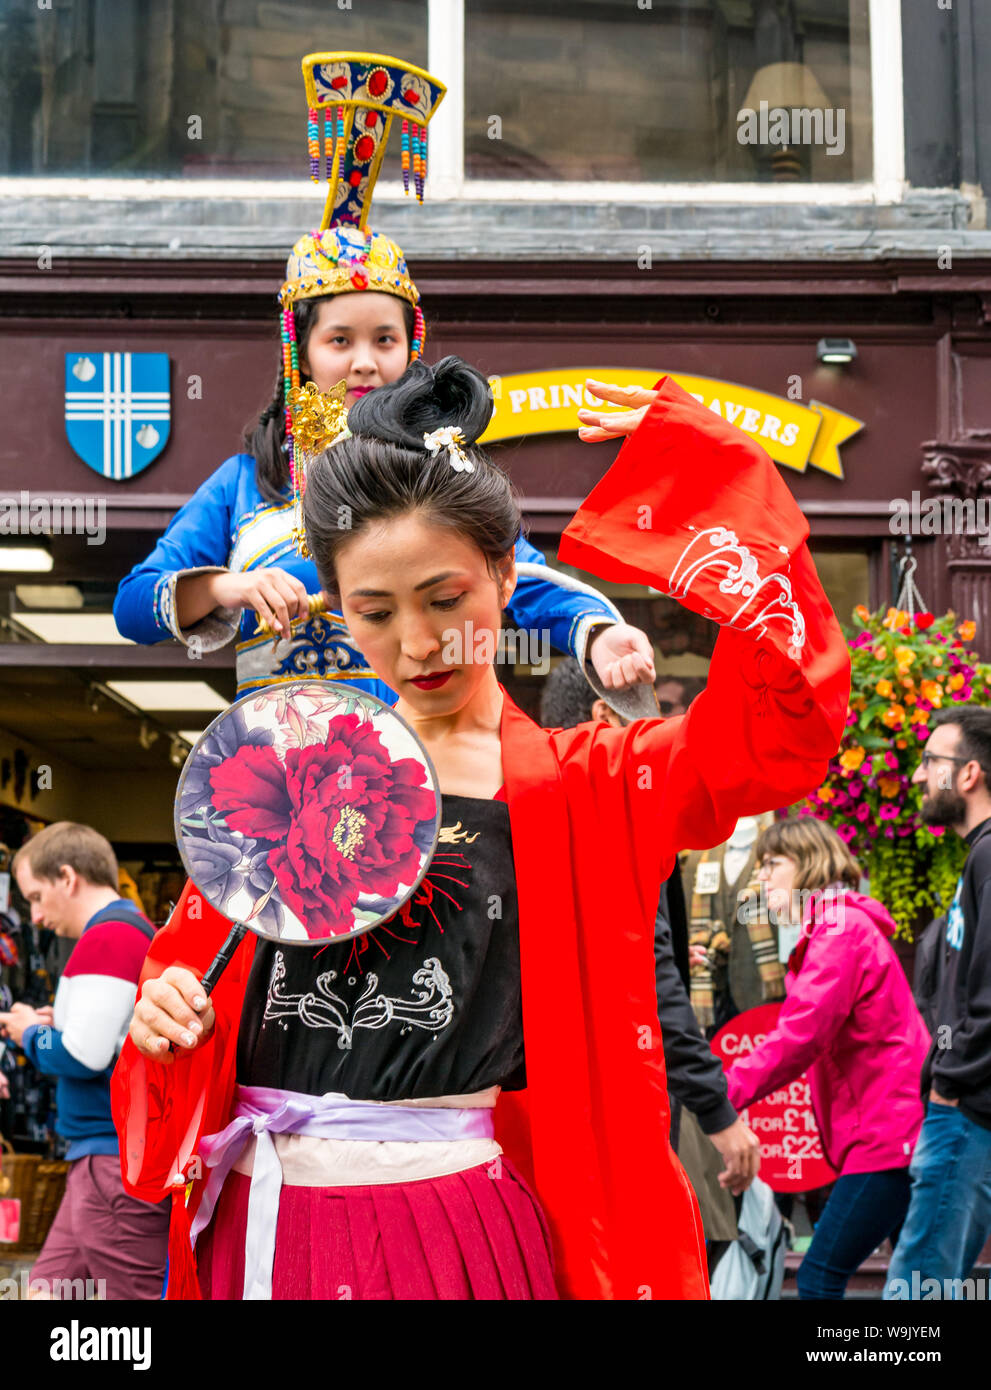 Royal Mile, Edinburgh, Scotland, UK, 14 August 2019. Edinburgh Festival Fringe: Festival goers watch performers from a show called Tang, which features classical Chinese elements such as costumes, operas and dances Stock Photo